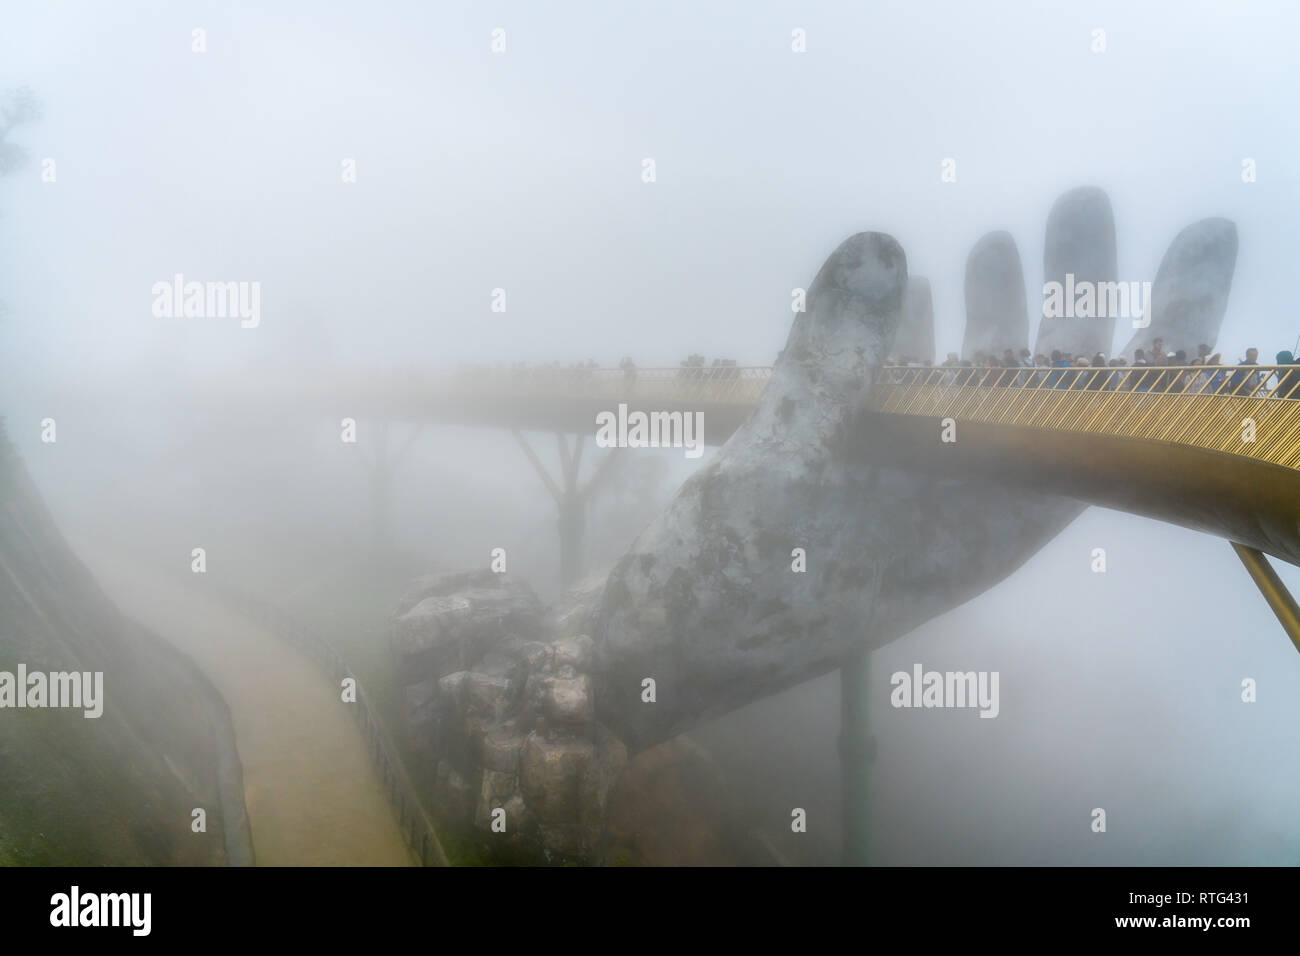 The Golden Bridge, supported by two giant hands, in Vietnam Stock Photo